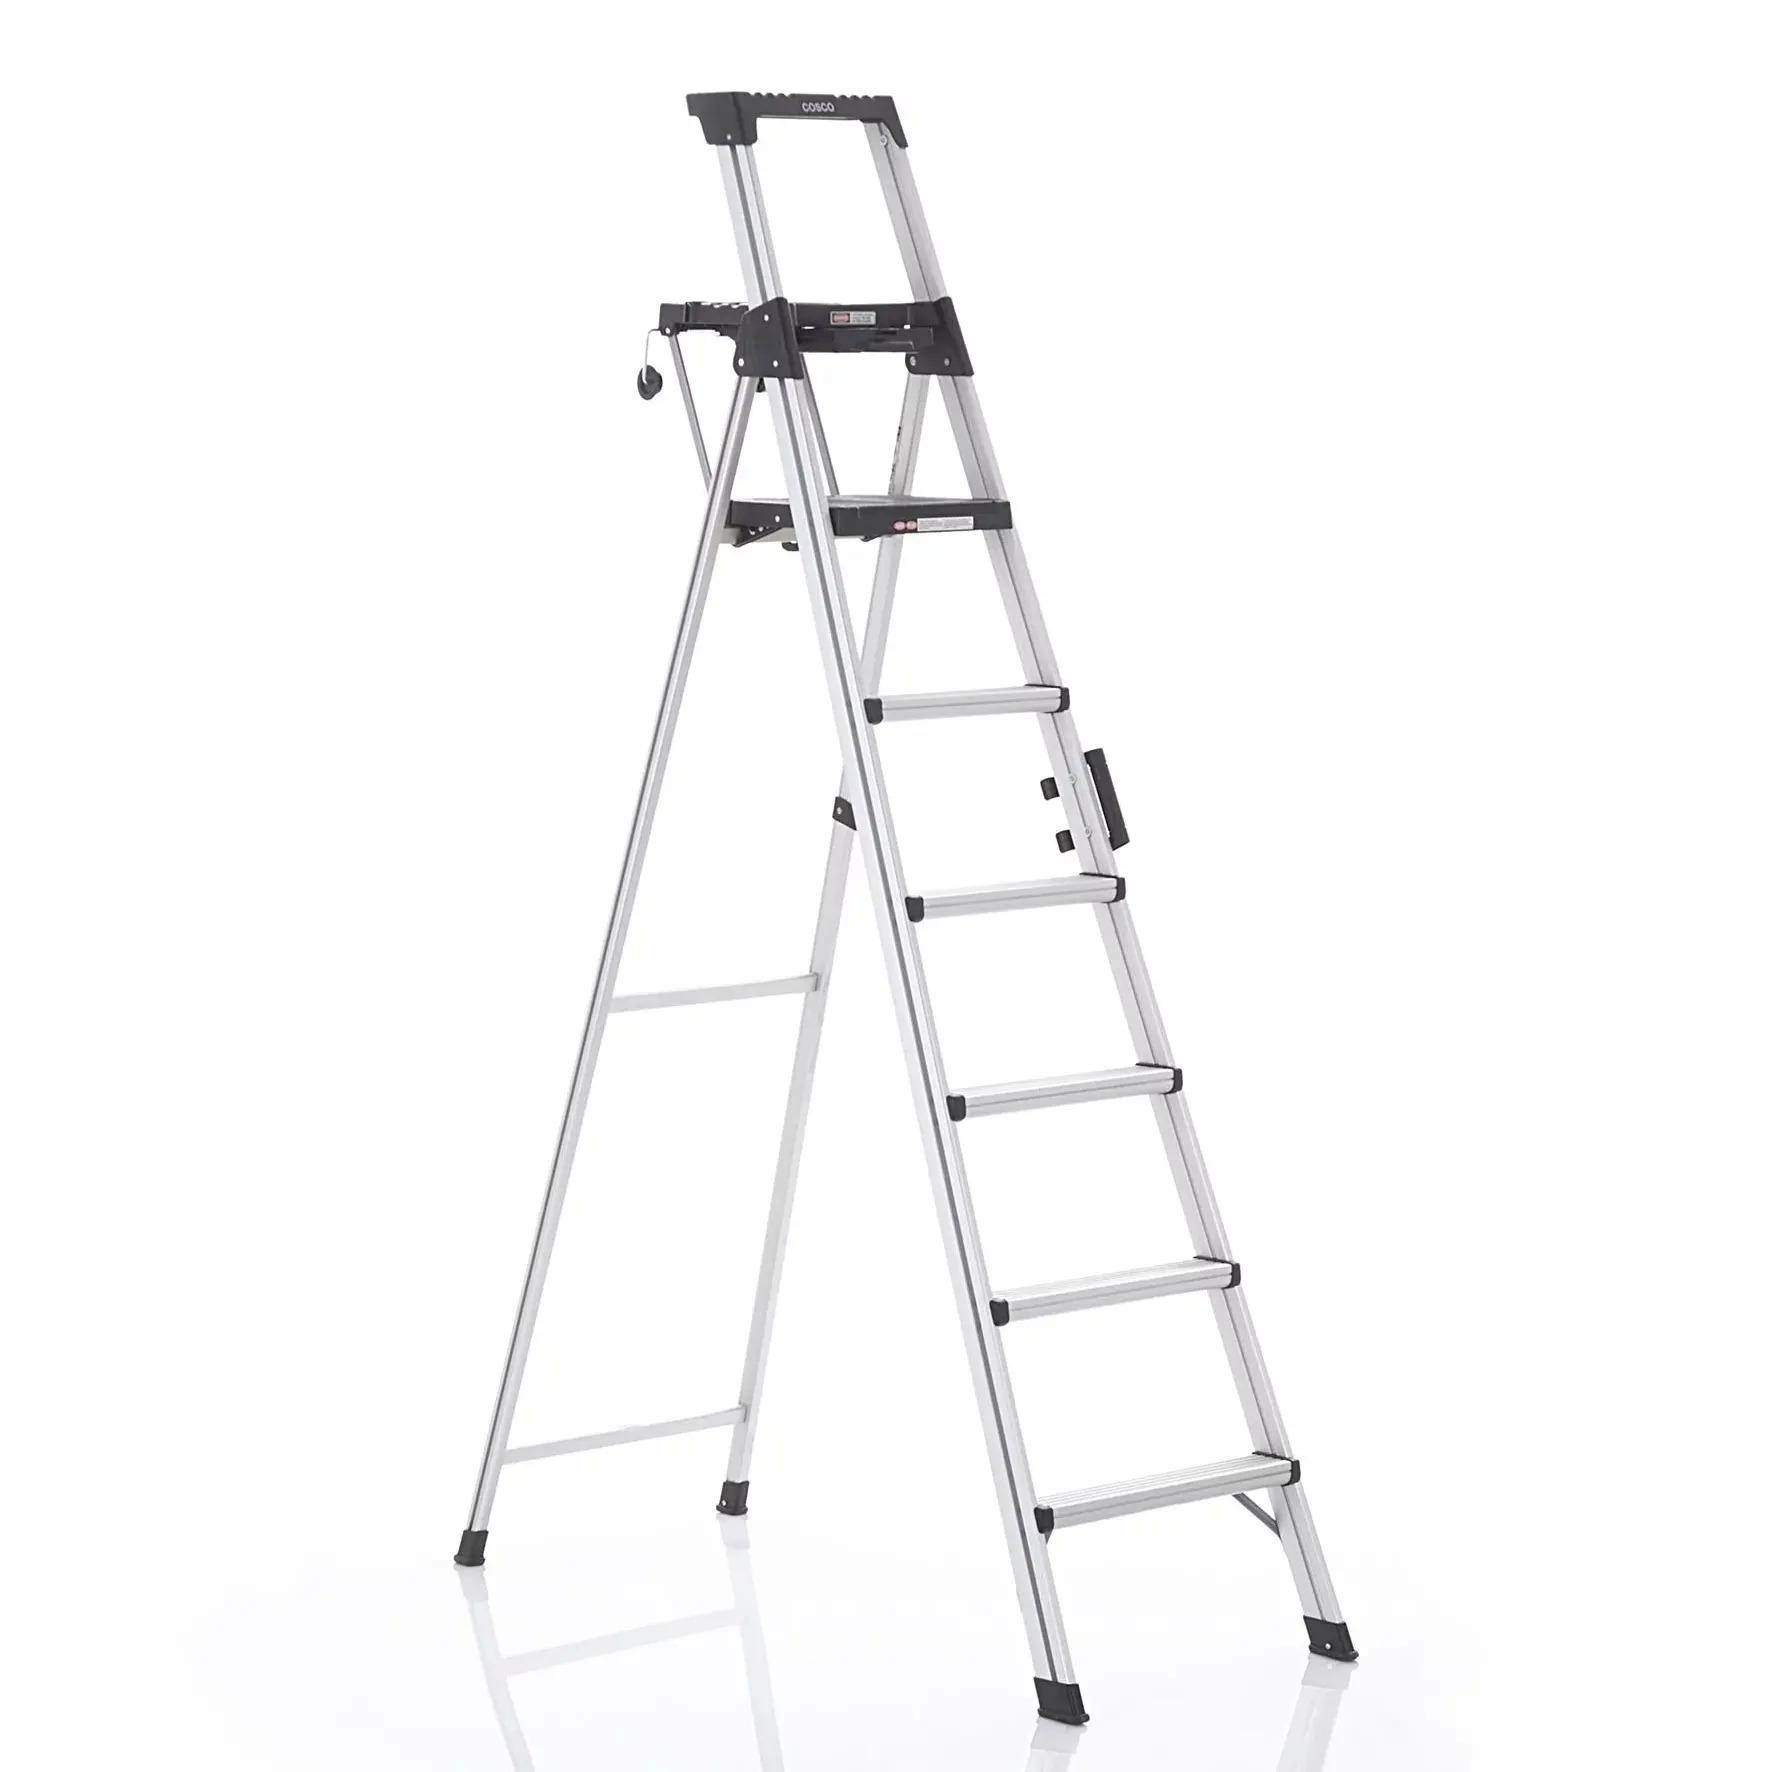 Cosco 8ft Signature Series Aluminum Folding Step Ladder for $126.60 Shipped